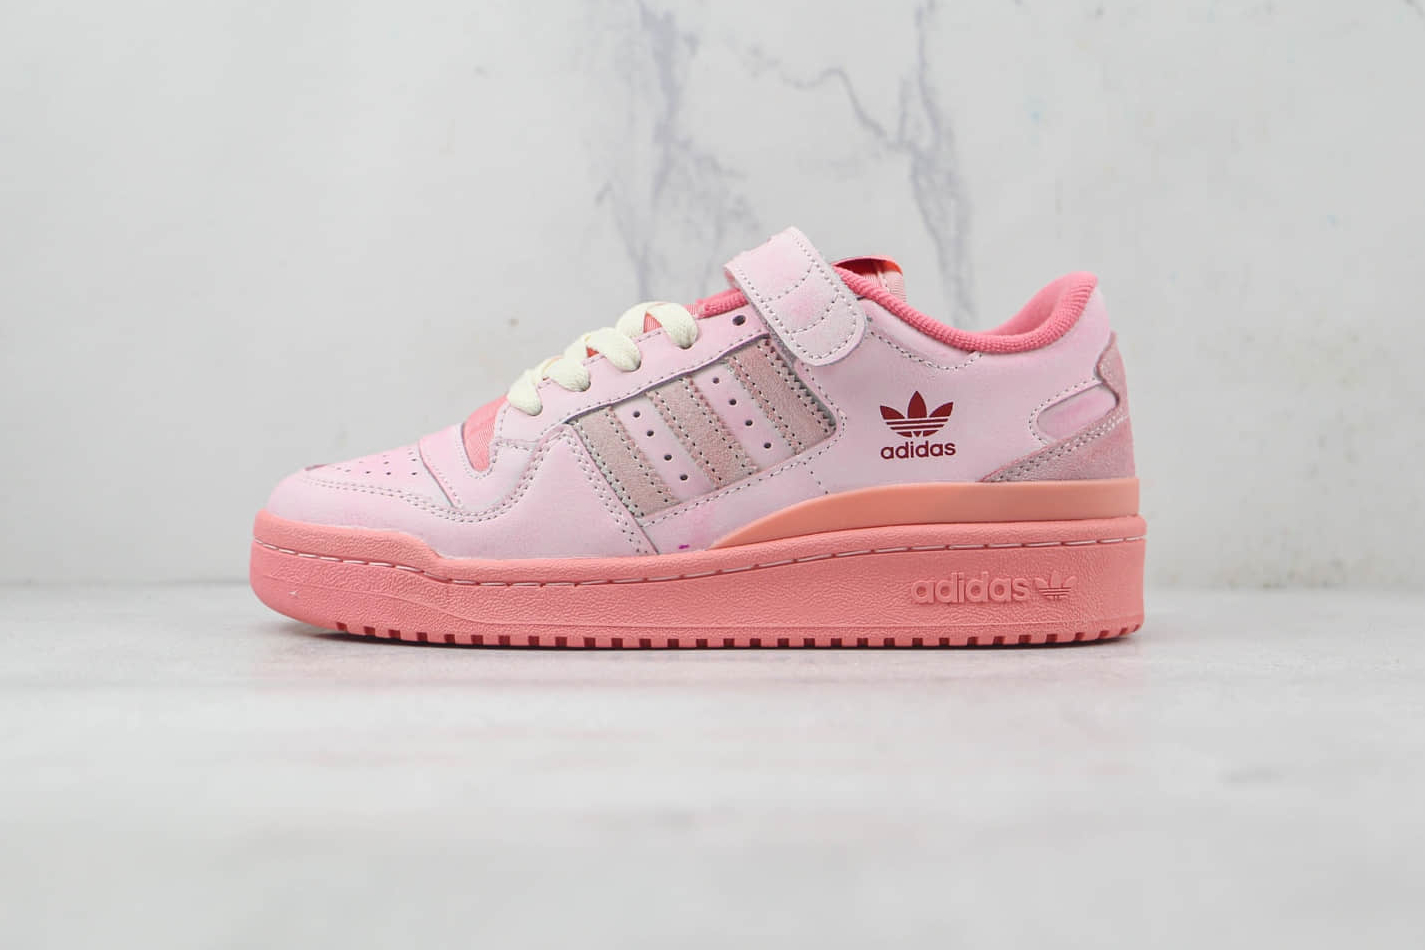 Adidas Forum 84 Low 'Pink' GY6980 - Stylish and Versatile Footwear